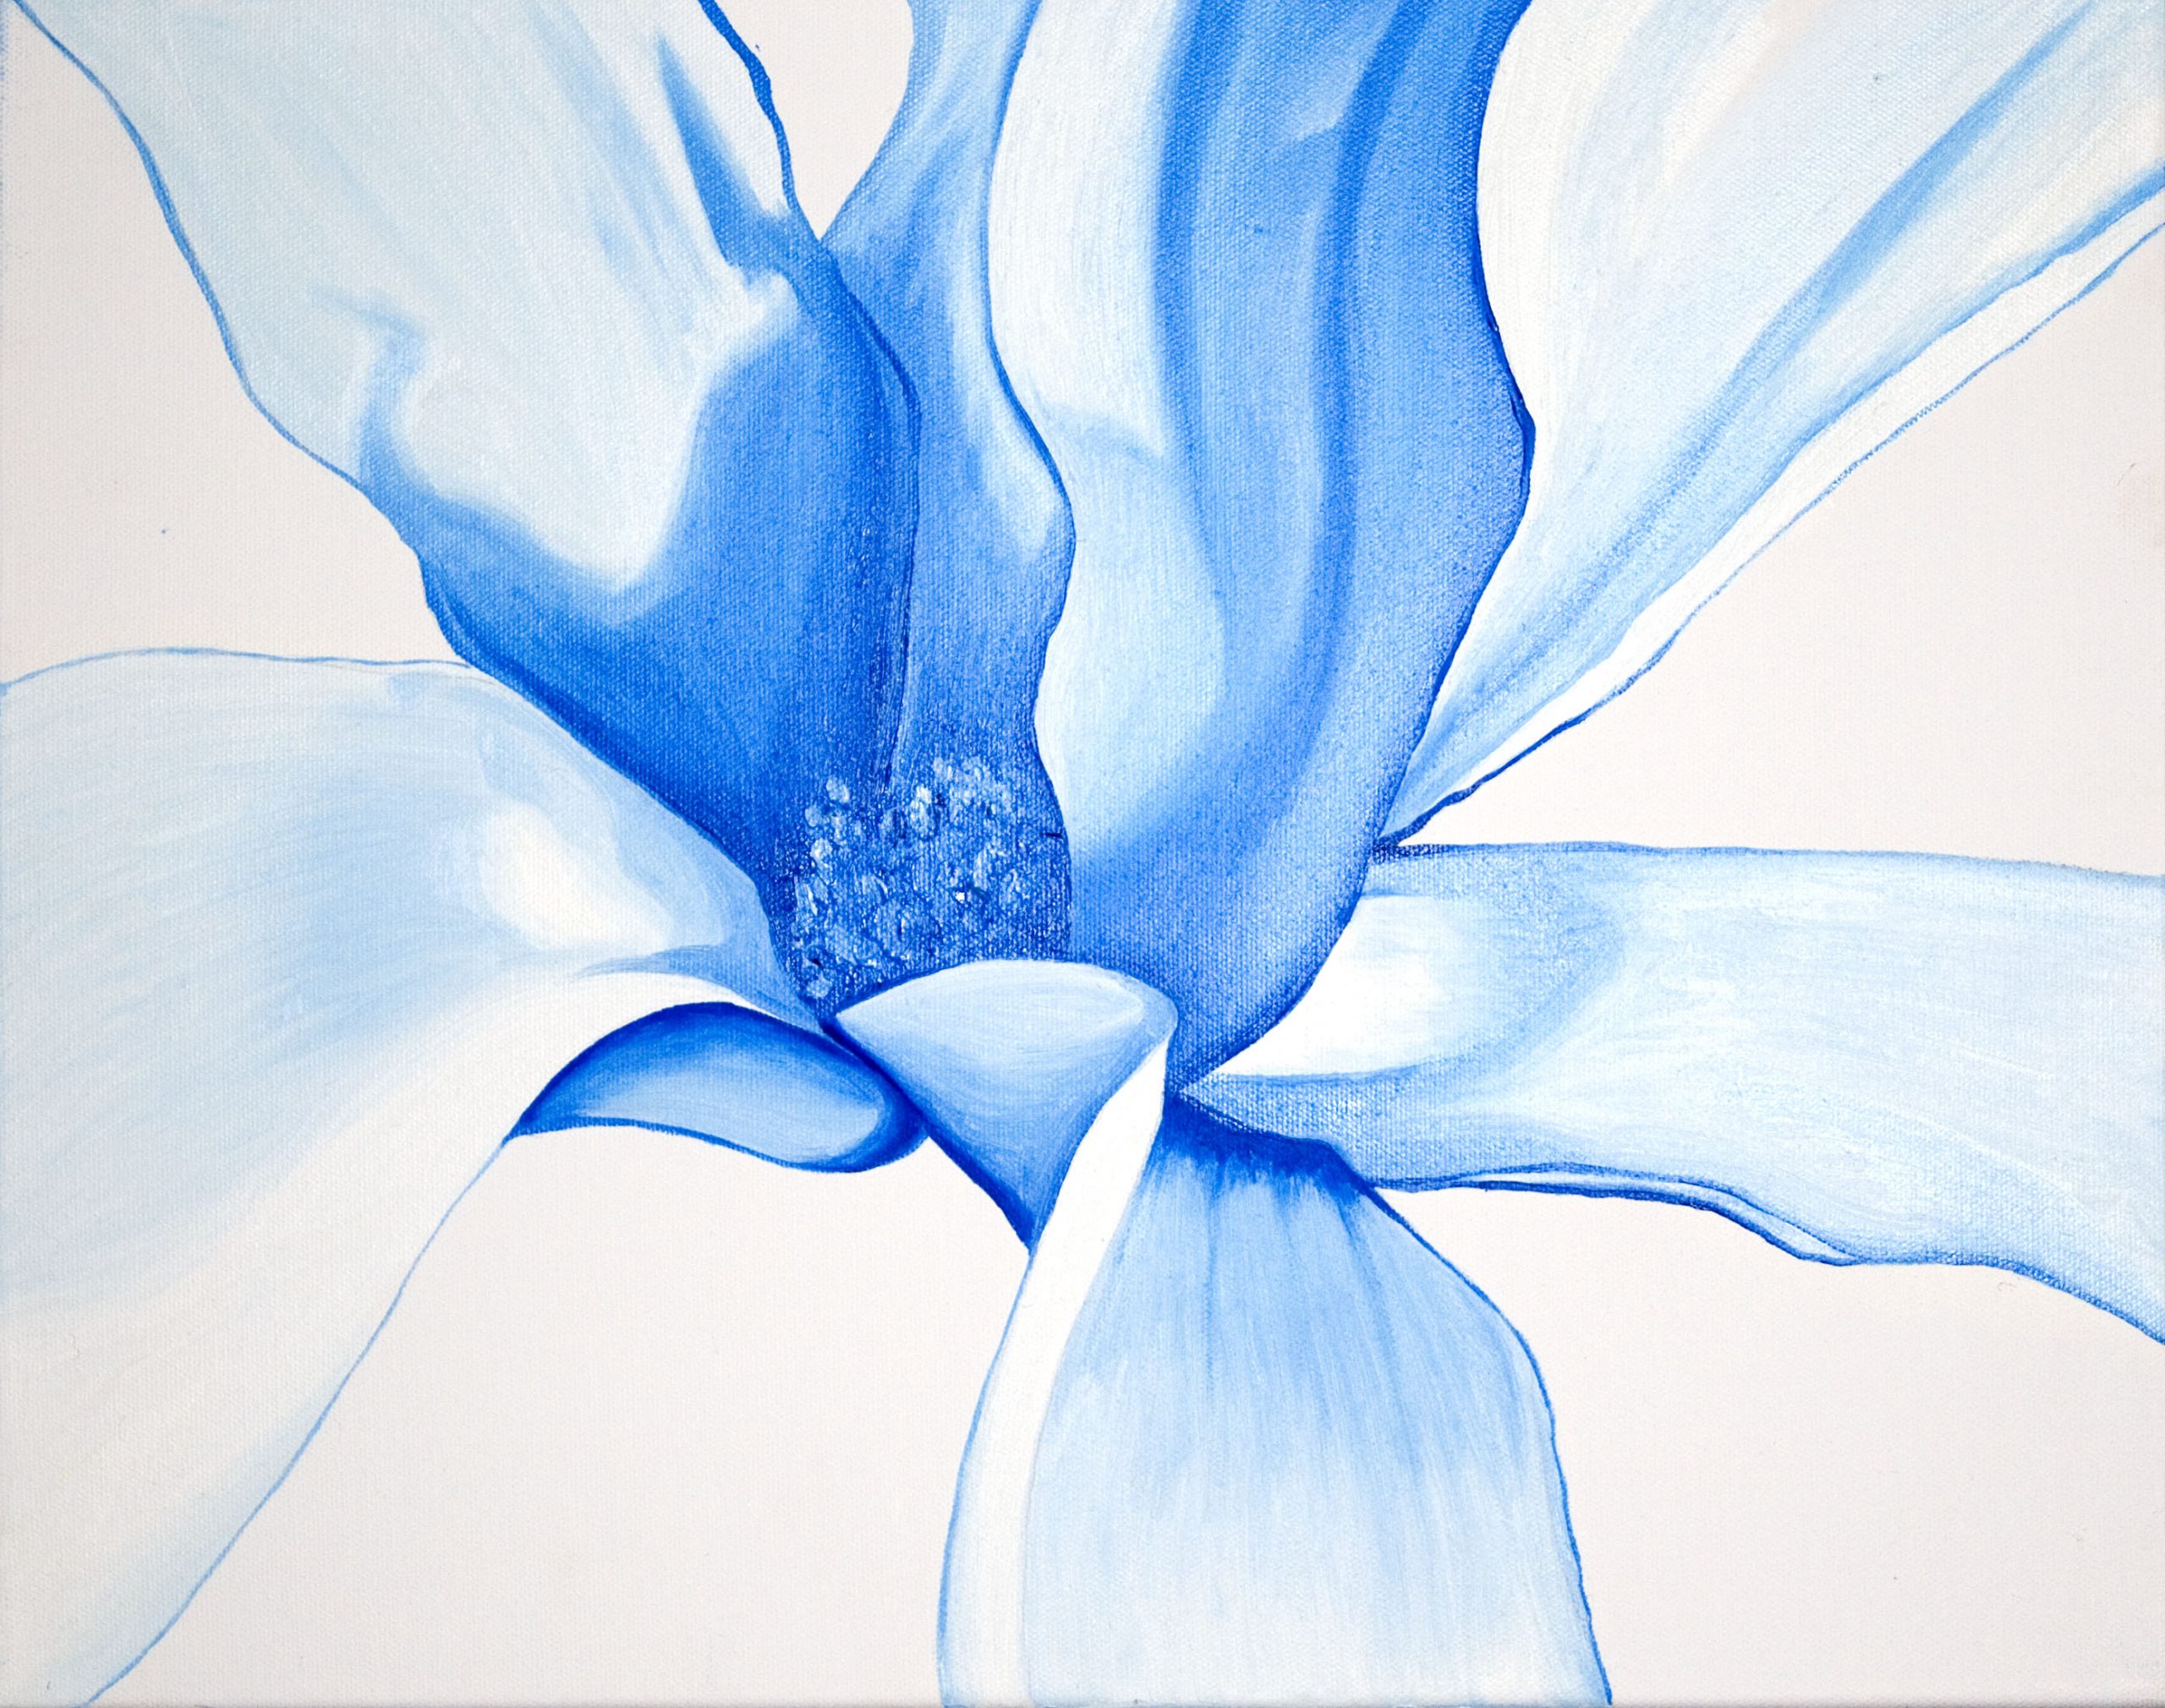 "Magnolia Flowers Part 1" Oil on stretched Canvas: studies of magnolia flowers; concentrating on light, shade and structure in a restricted colour palette of blues.